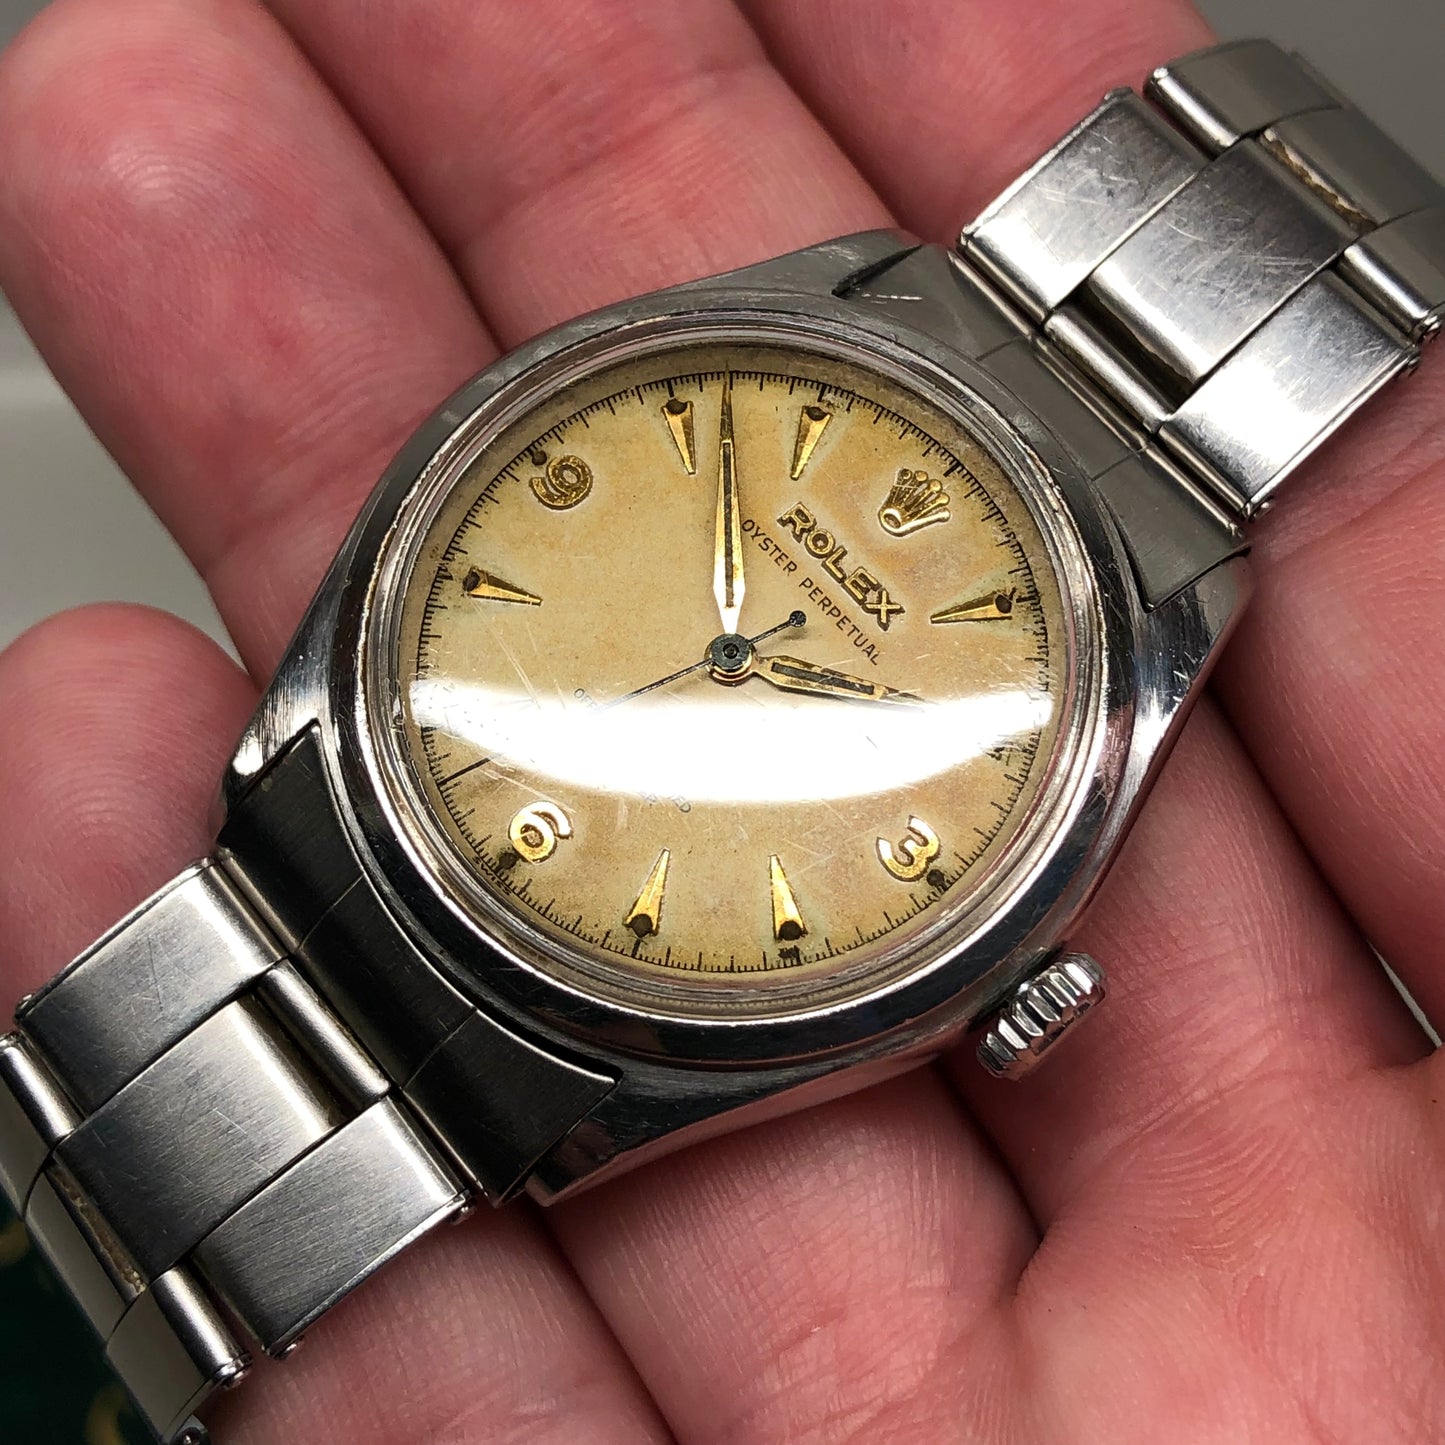 1952 Rolex Oyster Perpetual 6106 Bubbleback Steel Chronometer Tropical Wristwatch - Hashtag Watch Company